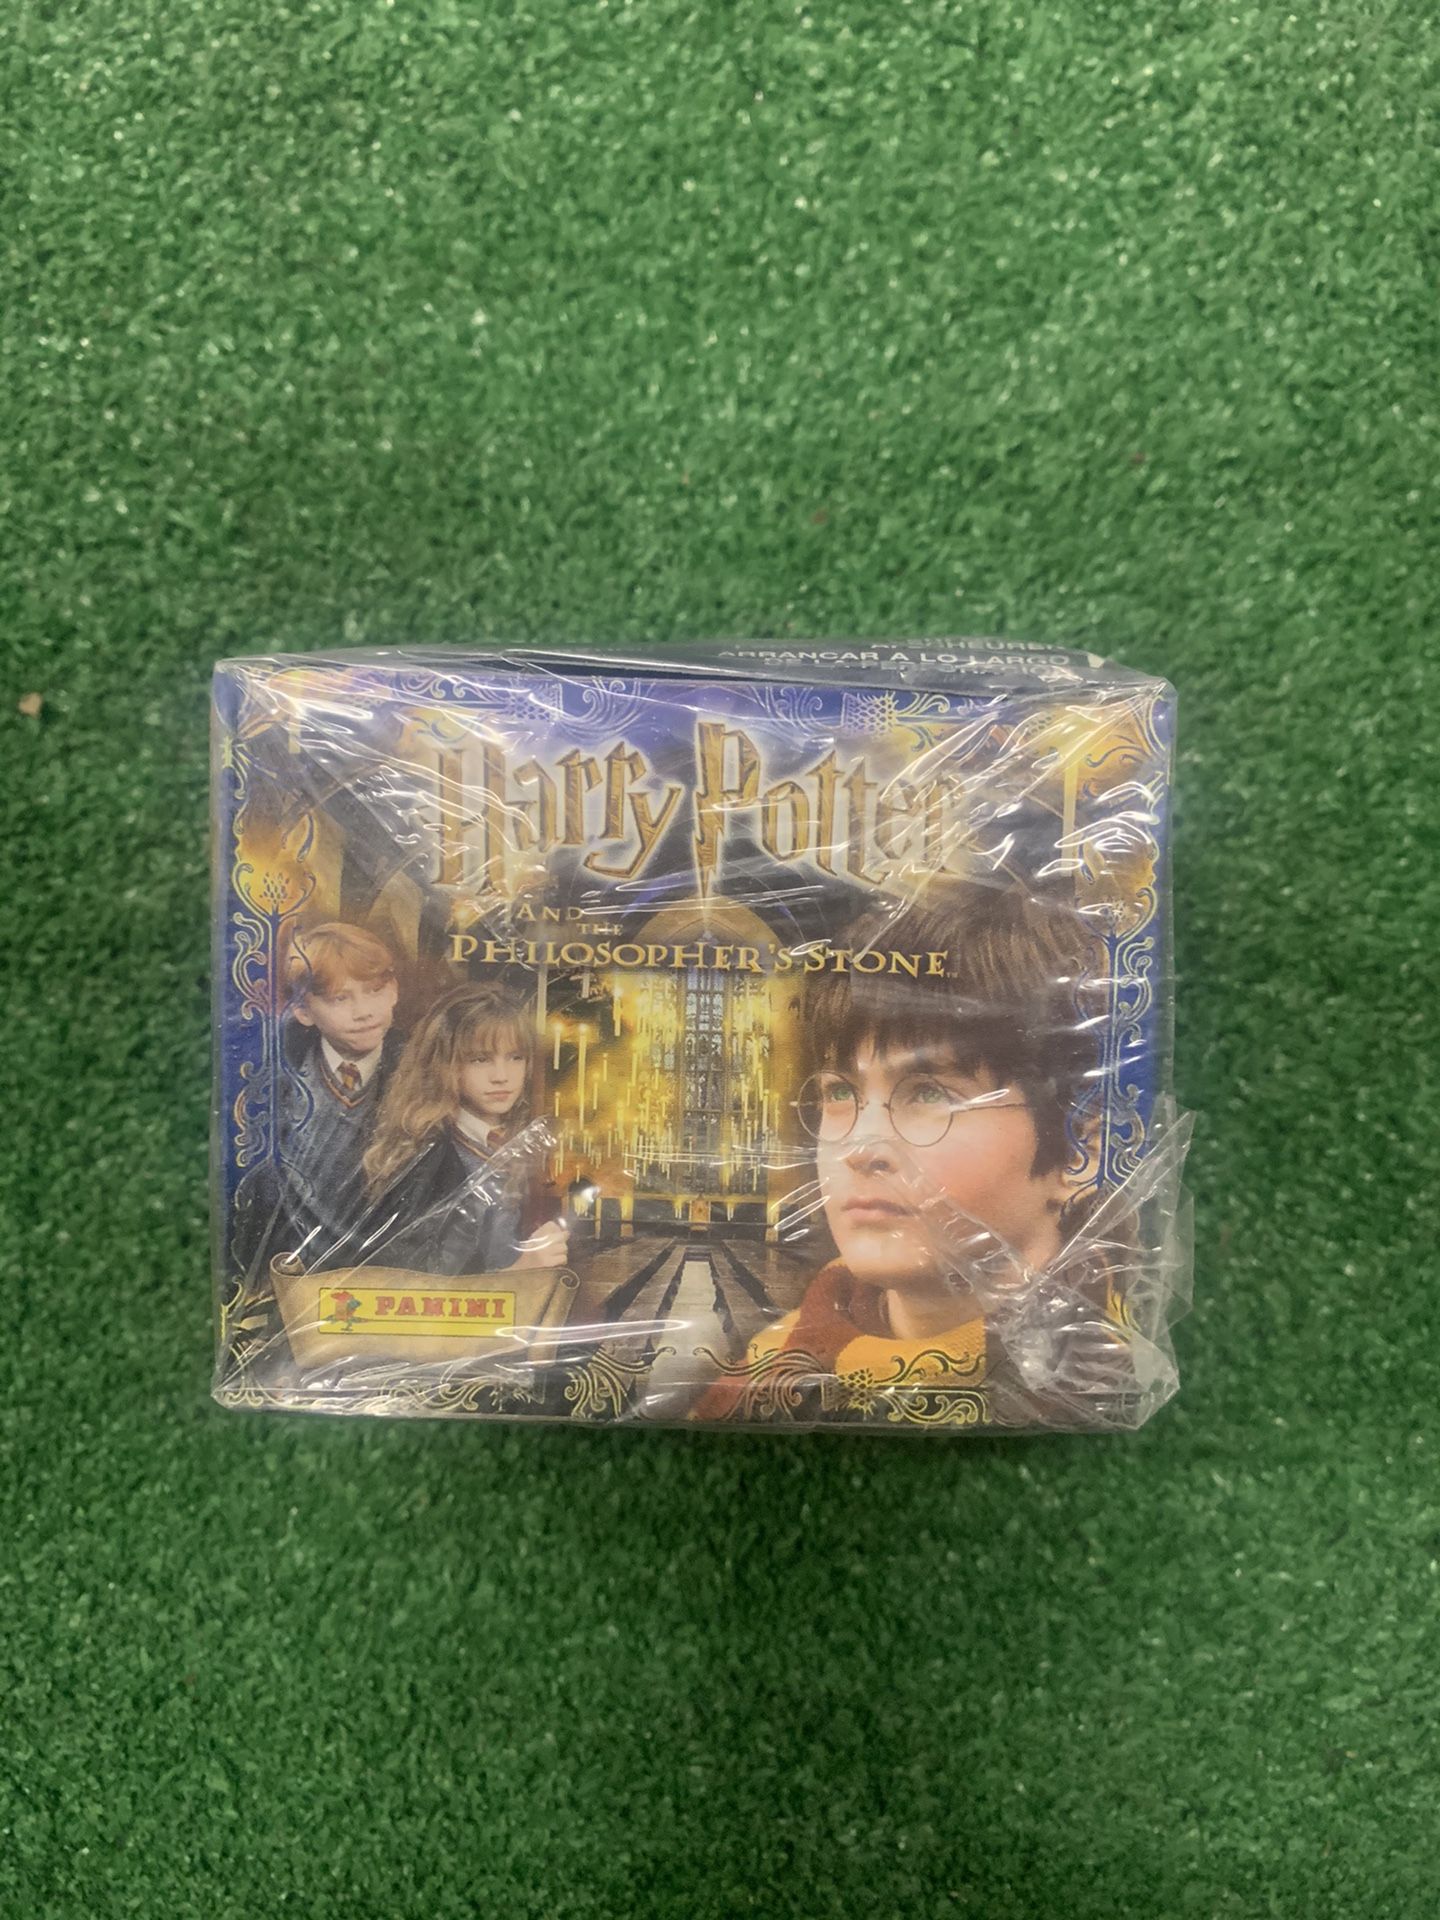 2001 Harry Potter Philosopher’s Stone Panini Stickers 50 Pack Factory Sealed Box